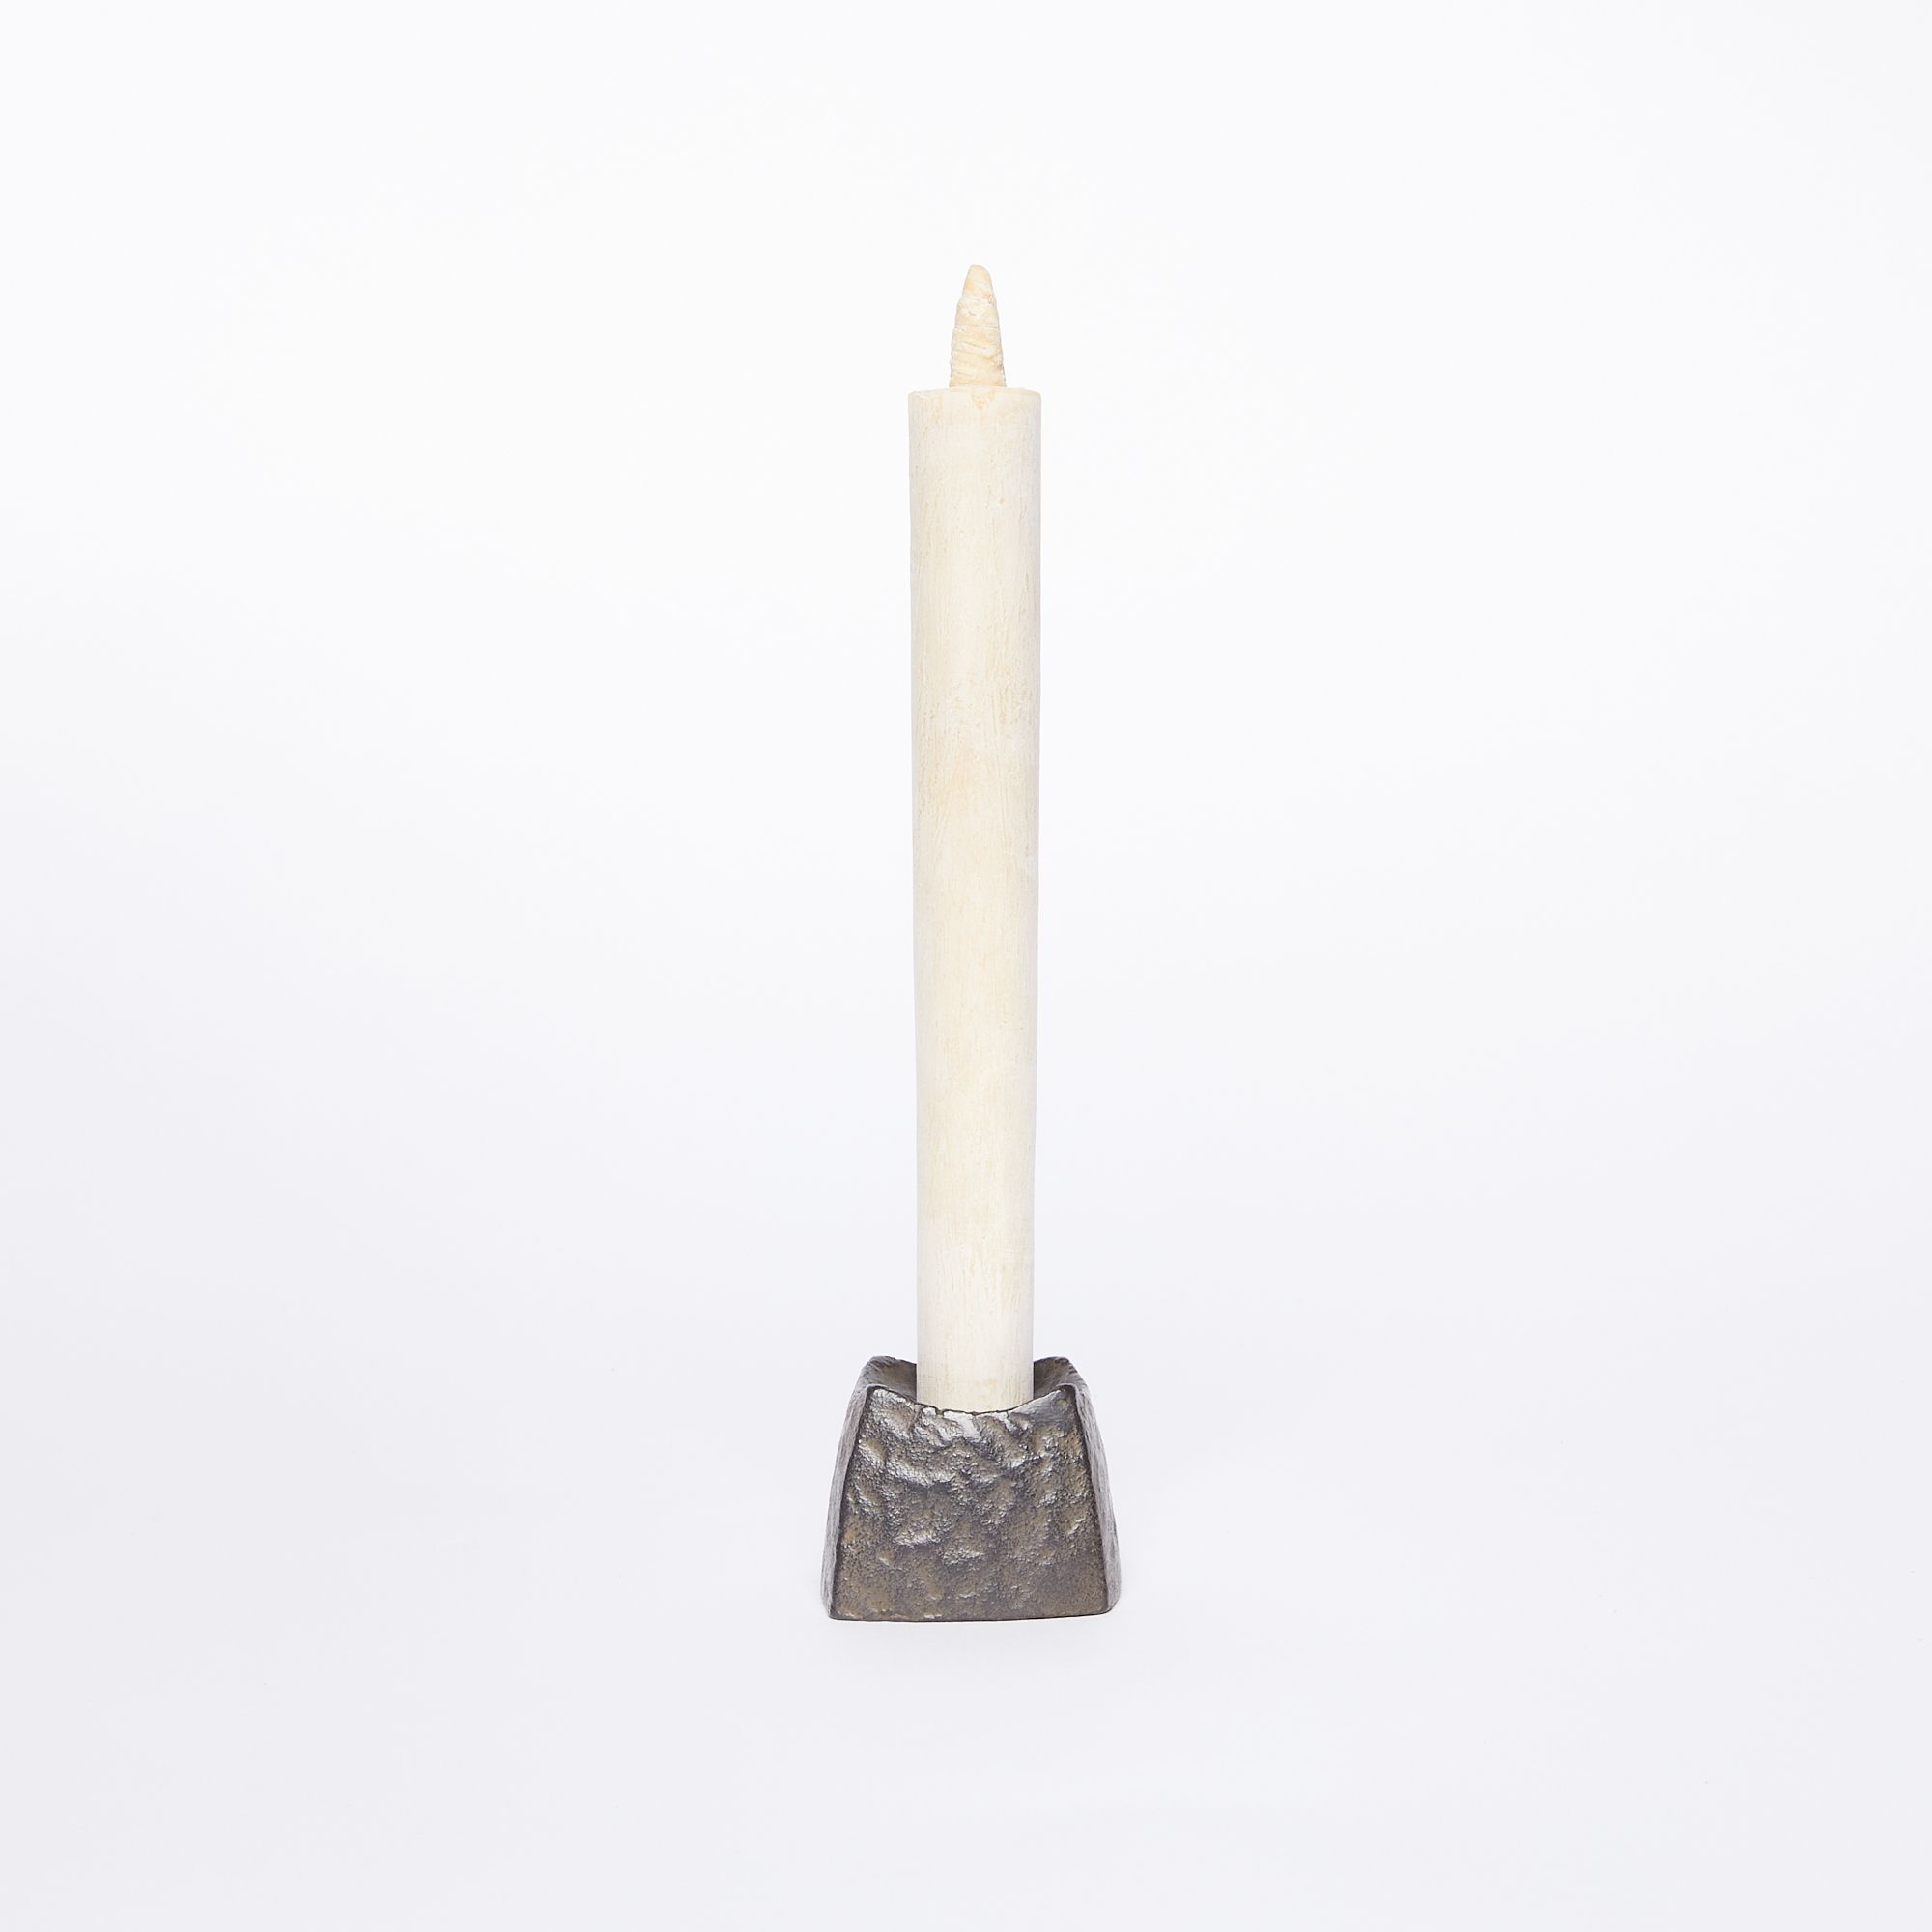 A small black square candle holder with a hammered metal outside holding a tall cream color candle